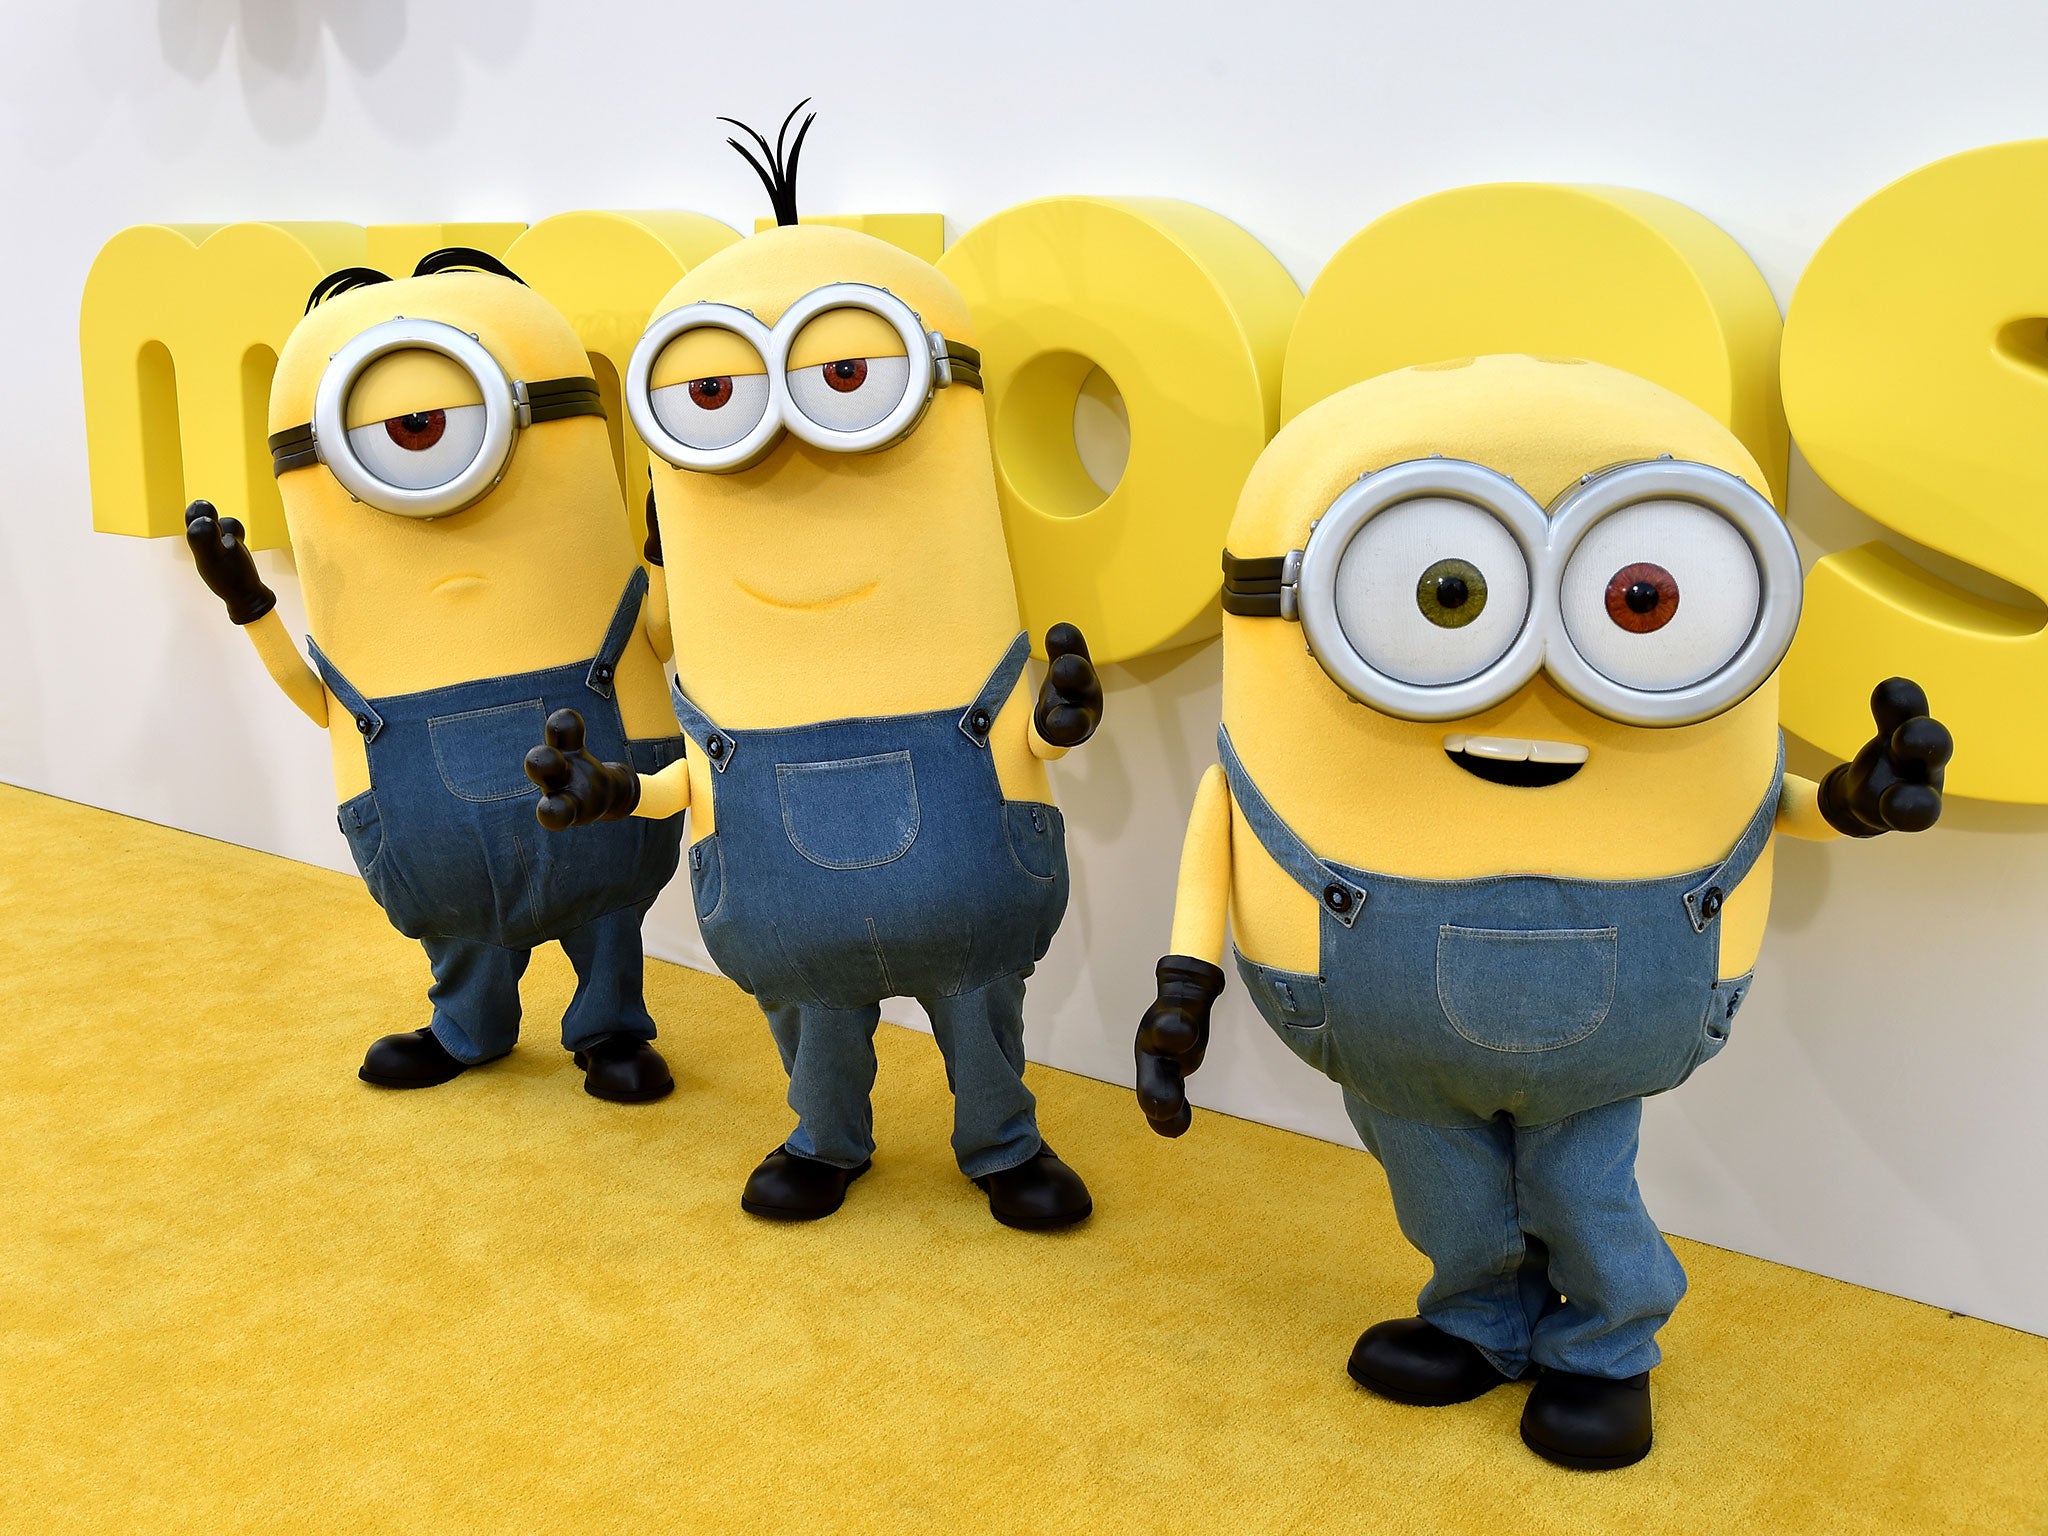 Minions have topped a poll of ideal fantasy jobs